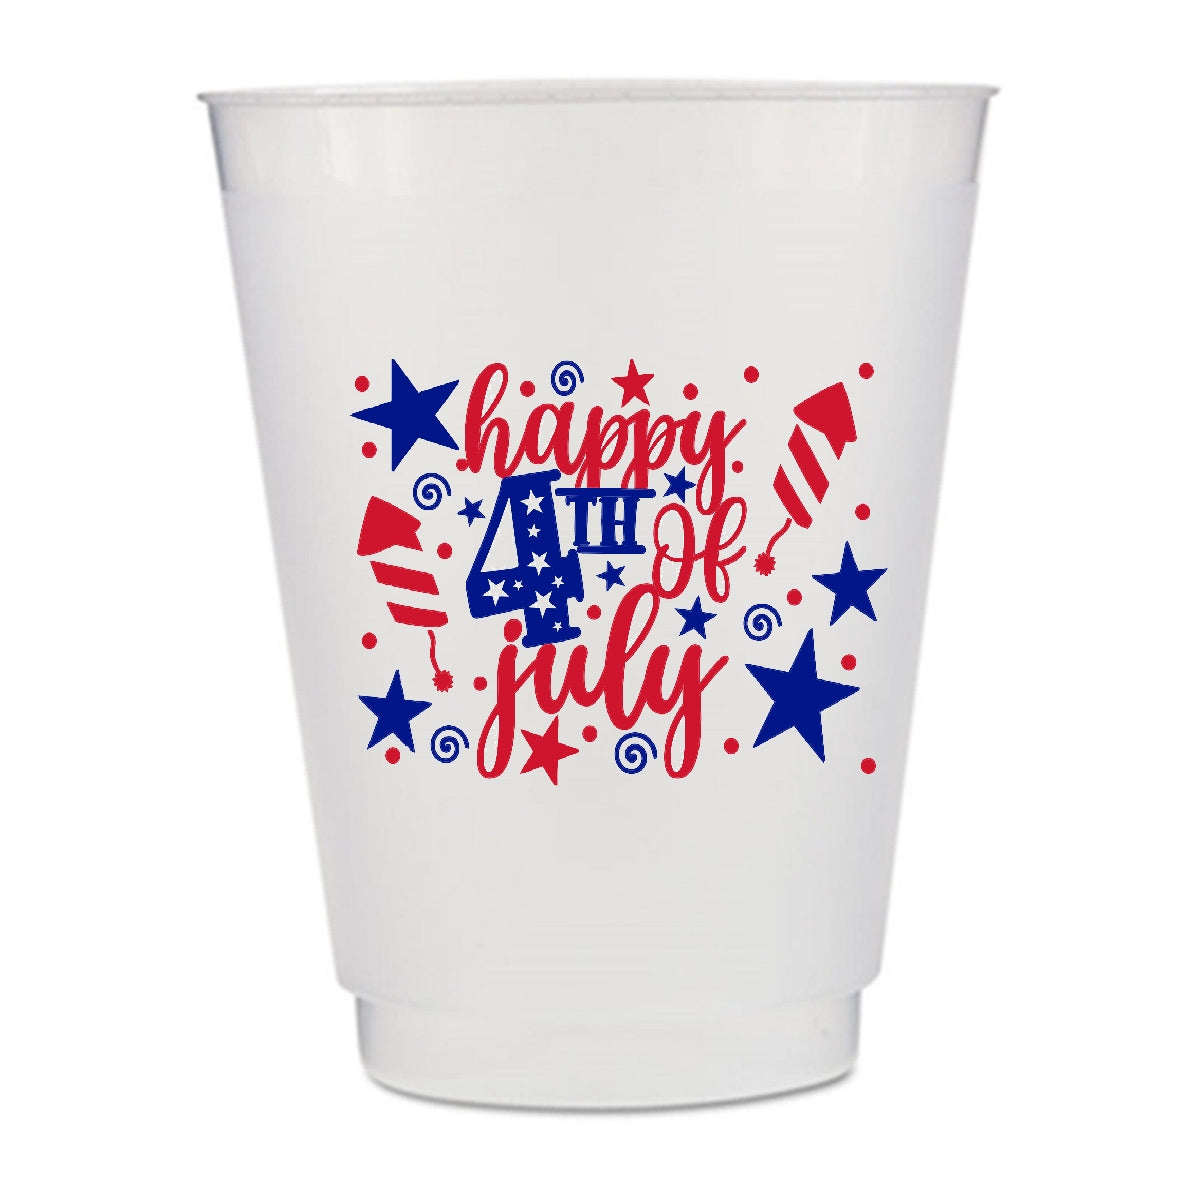 US Patriotic July 4th Party Cups|Happy Fouth of July Party Cups|Pre-Printed 16 oz Frost Flex Cups|Shatterproof Cups